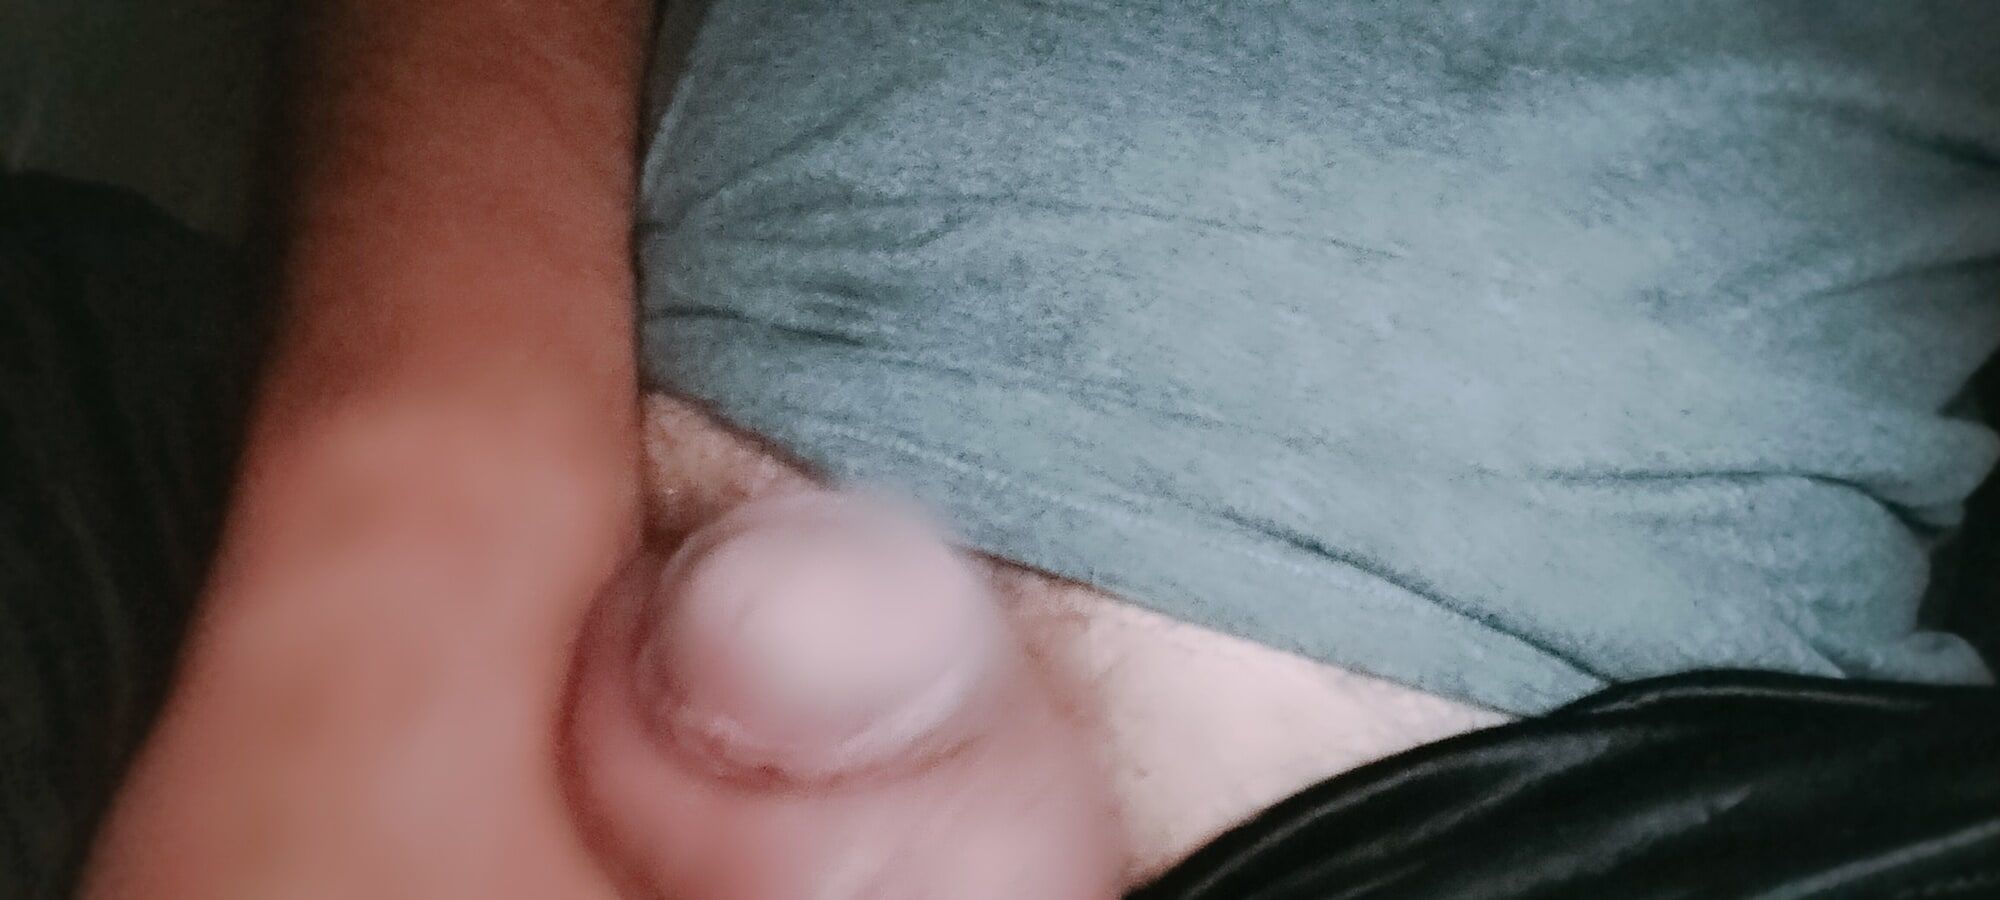 My ass has toys and my cock  #28